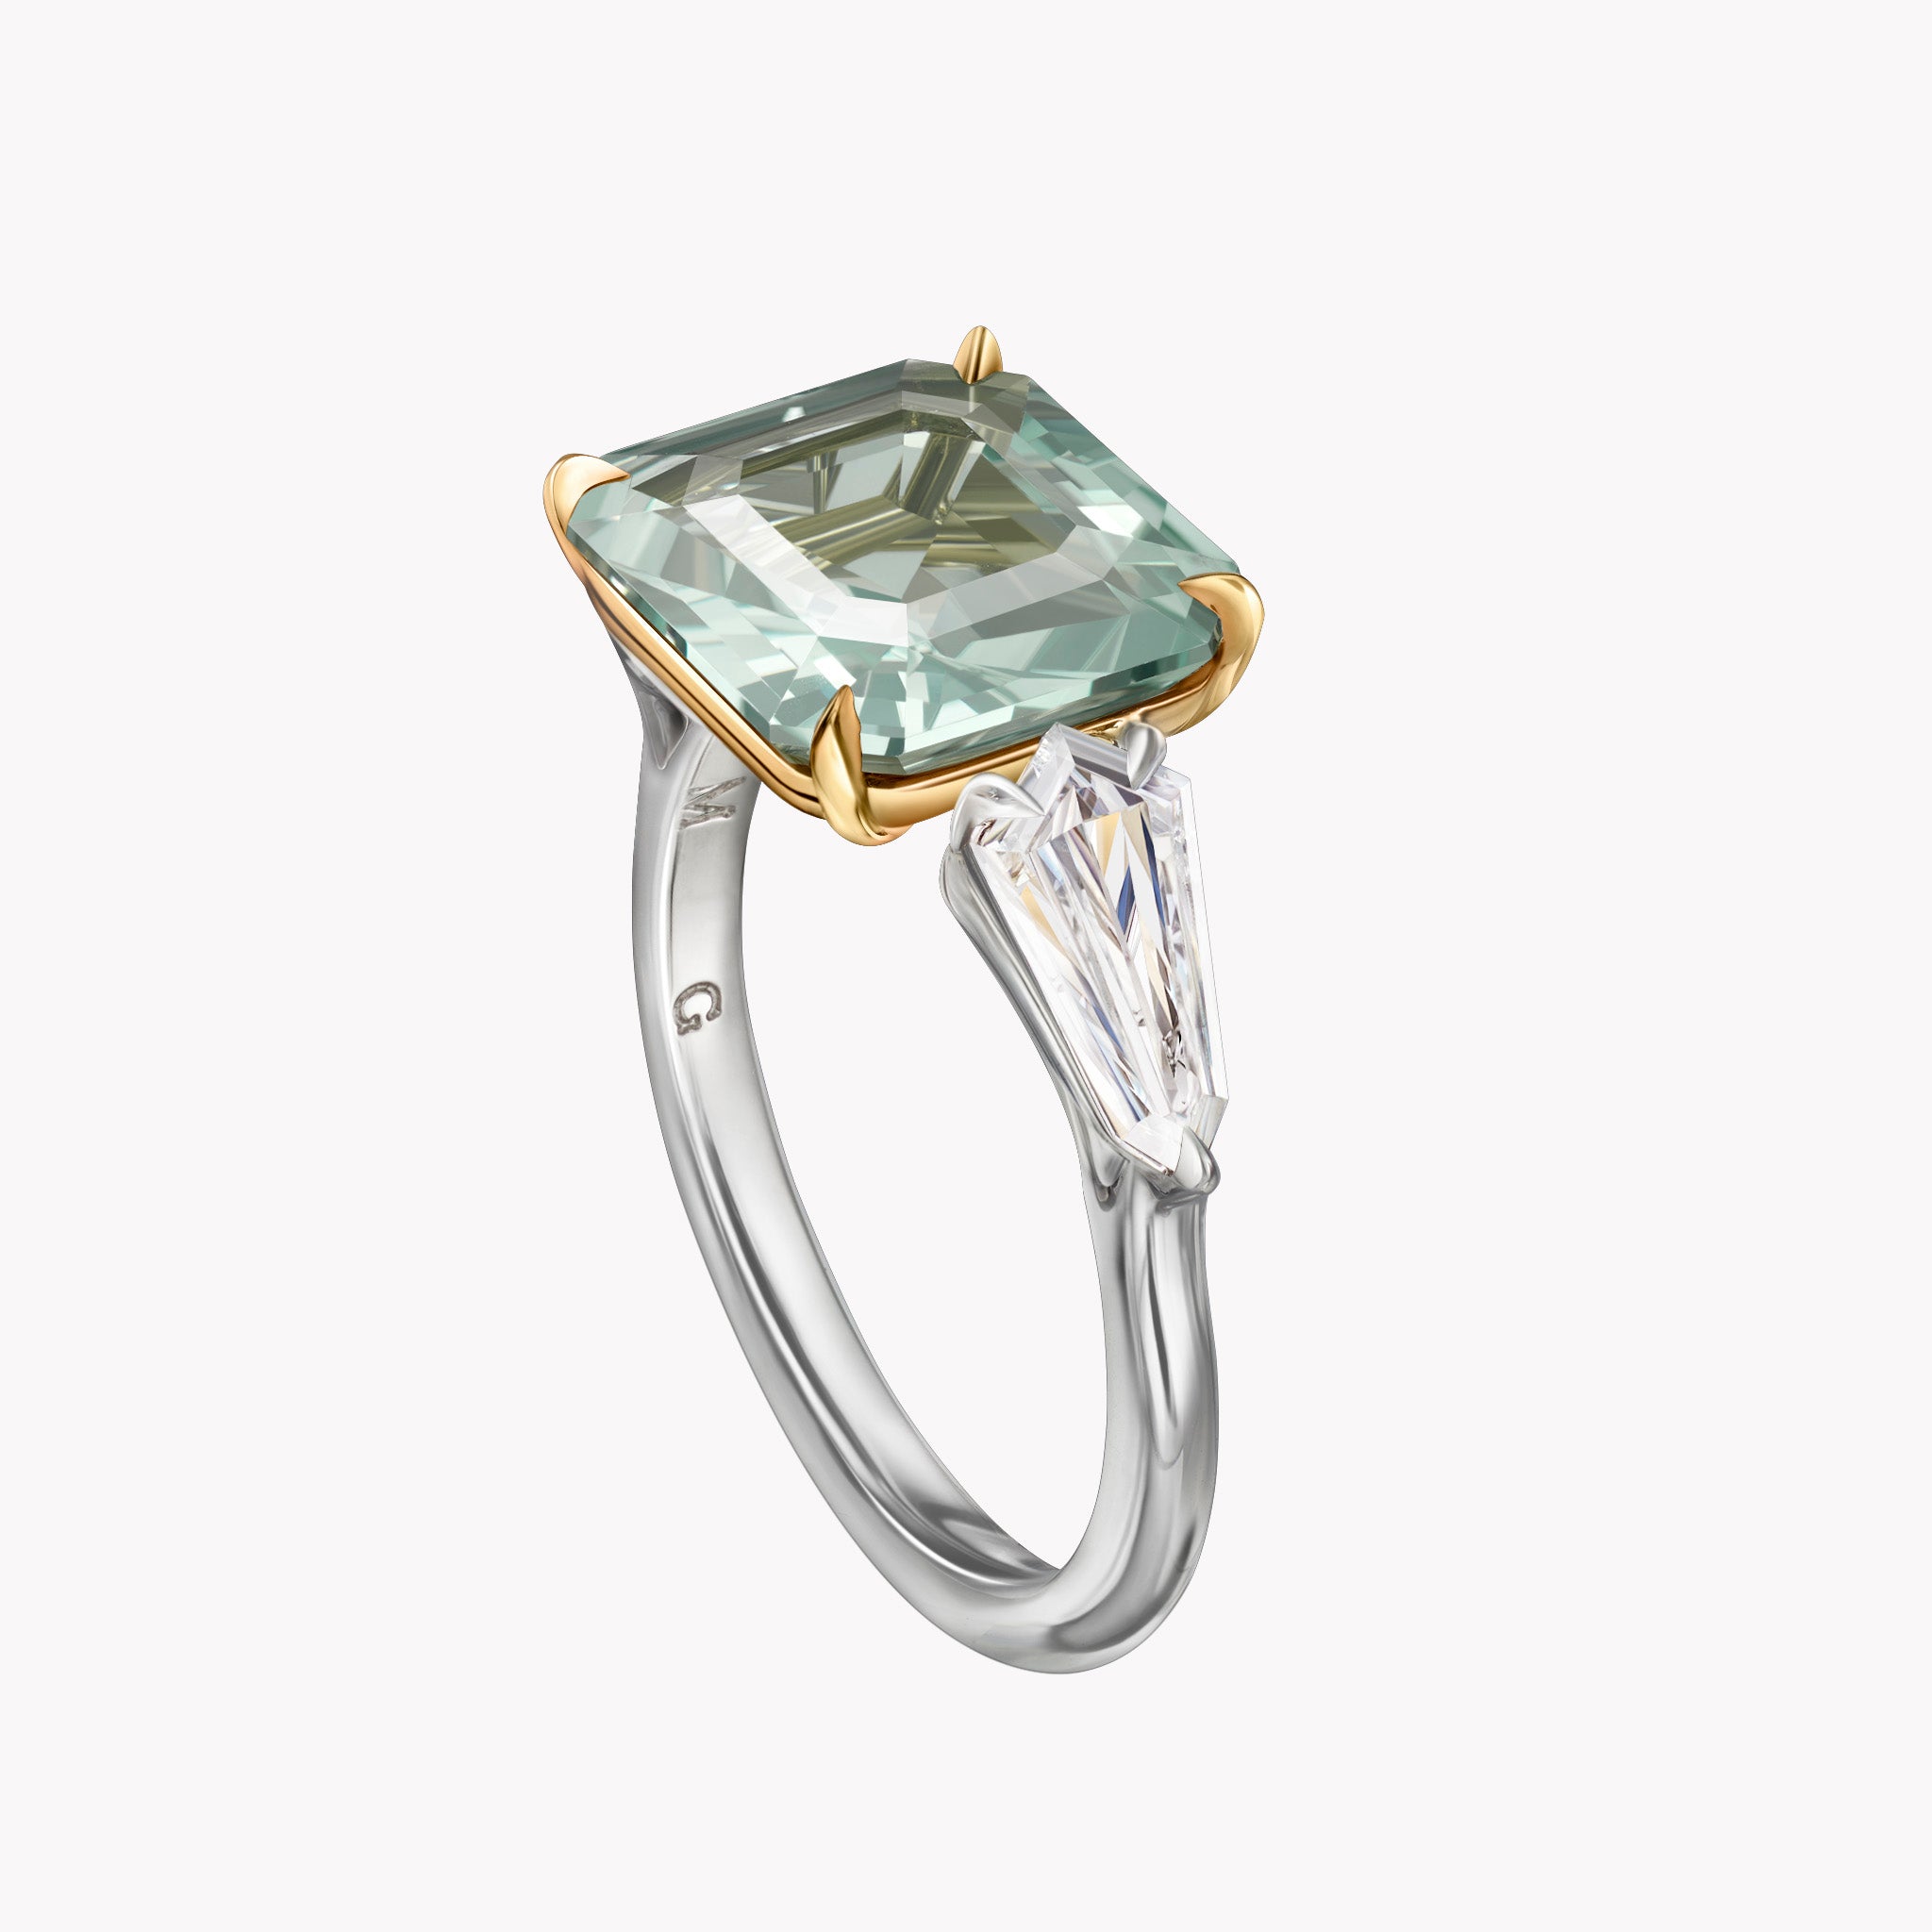 The Aster Seafoam Green Sapphire Ring